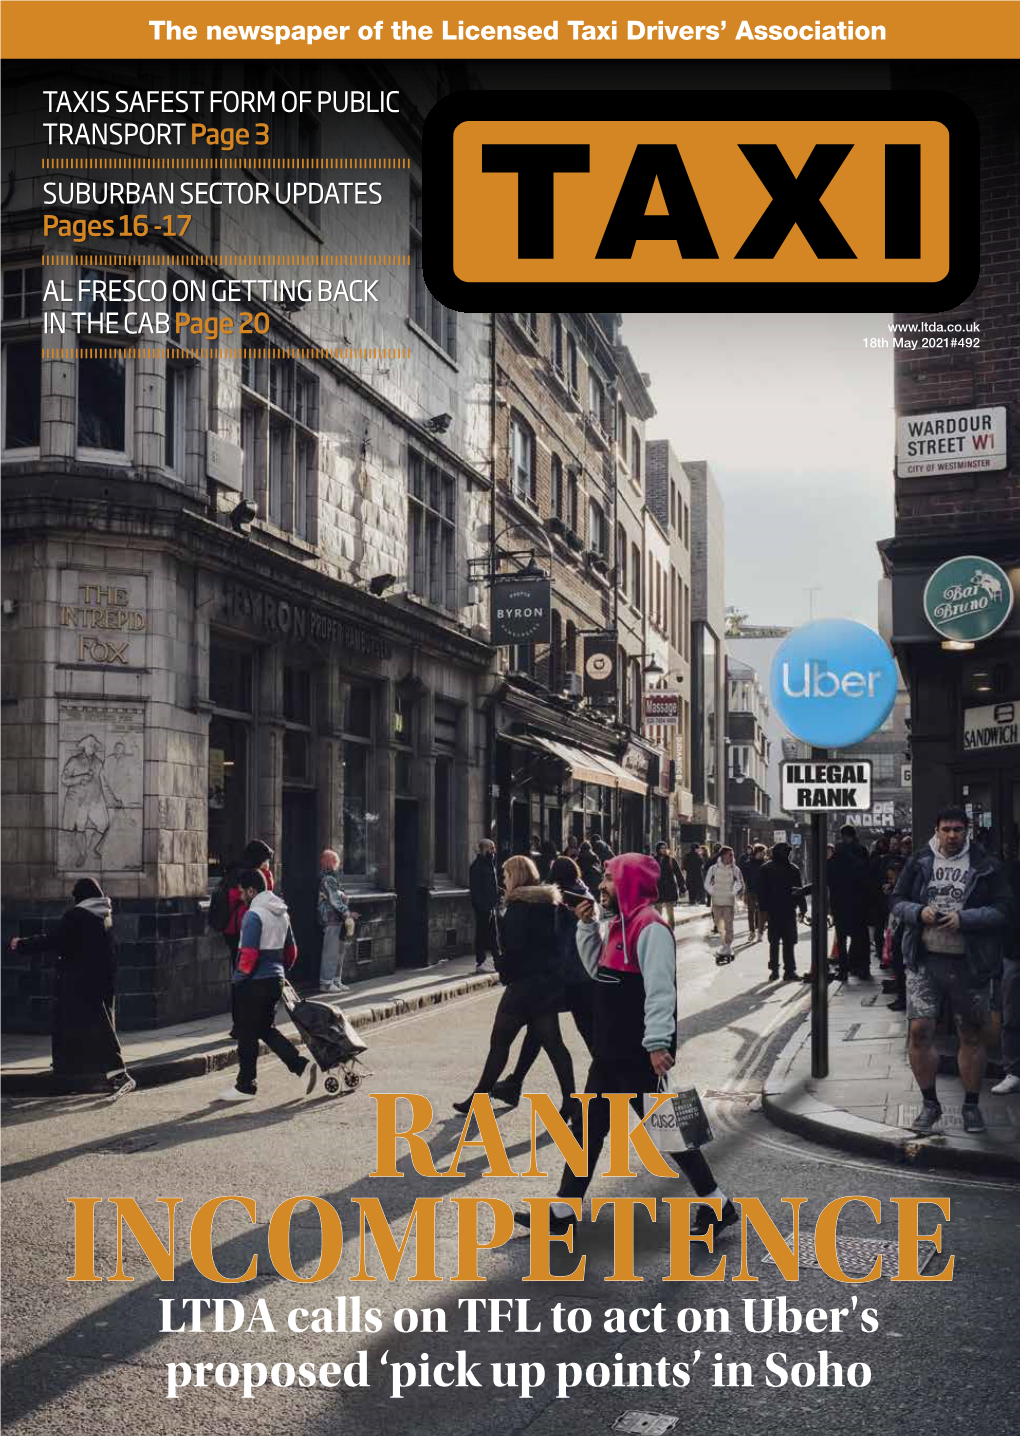 LTDA Calls on TFL to Act on Uber's Proposed ‘Pick up Points’ in Soho @Theltda 2